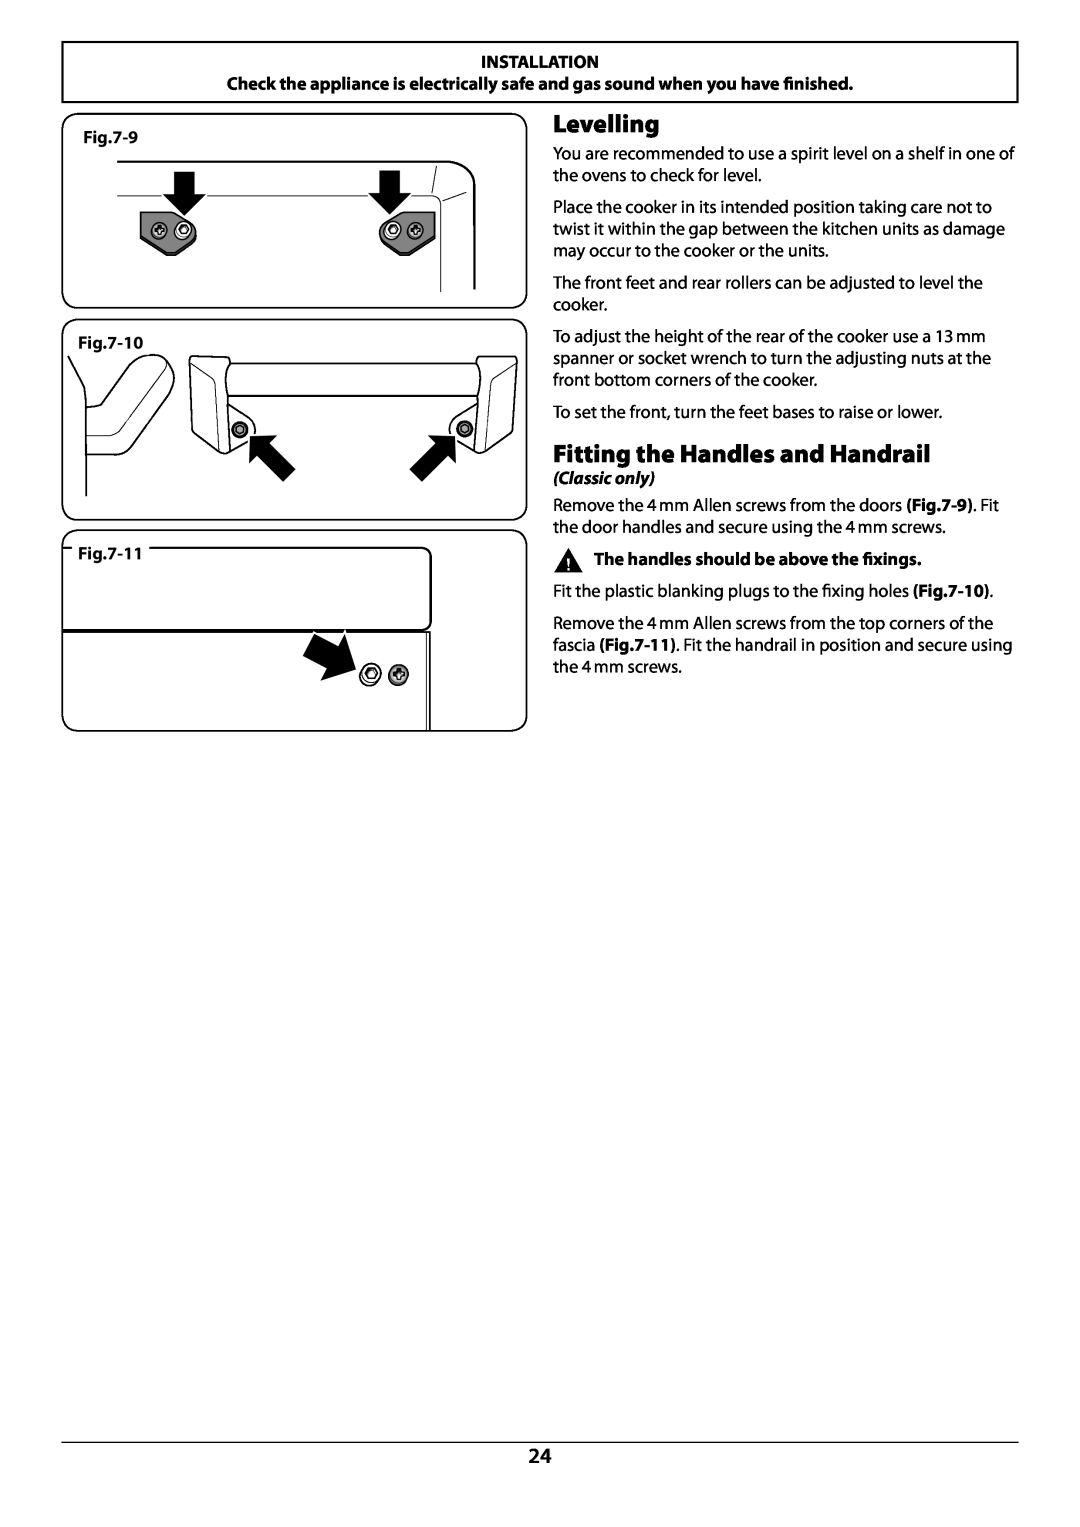 JVC toledo installation instructions Installation, 10 -11, Classic only, nnThe handles should be above the xings 